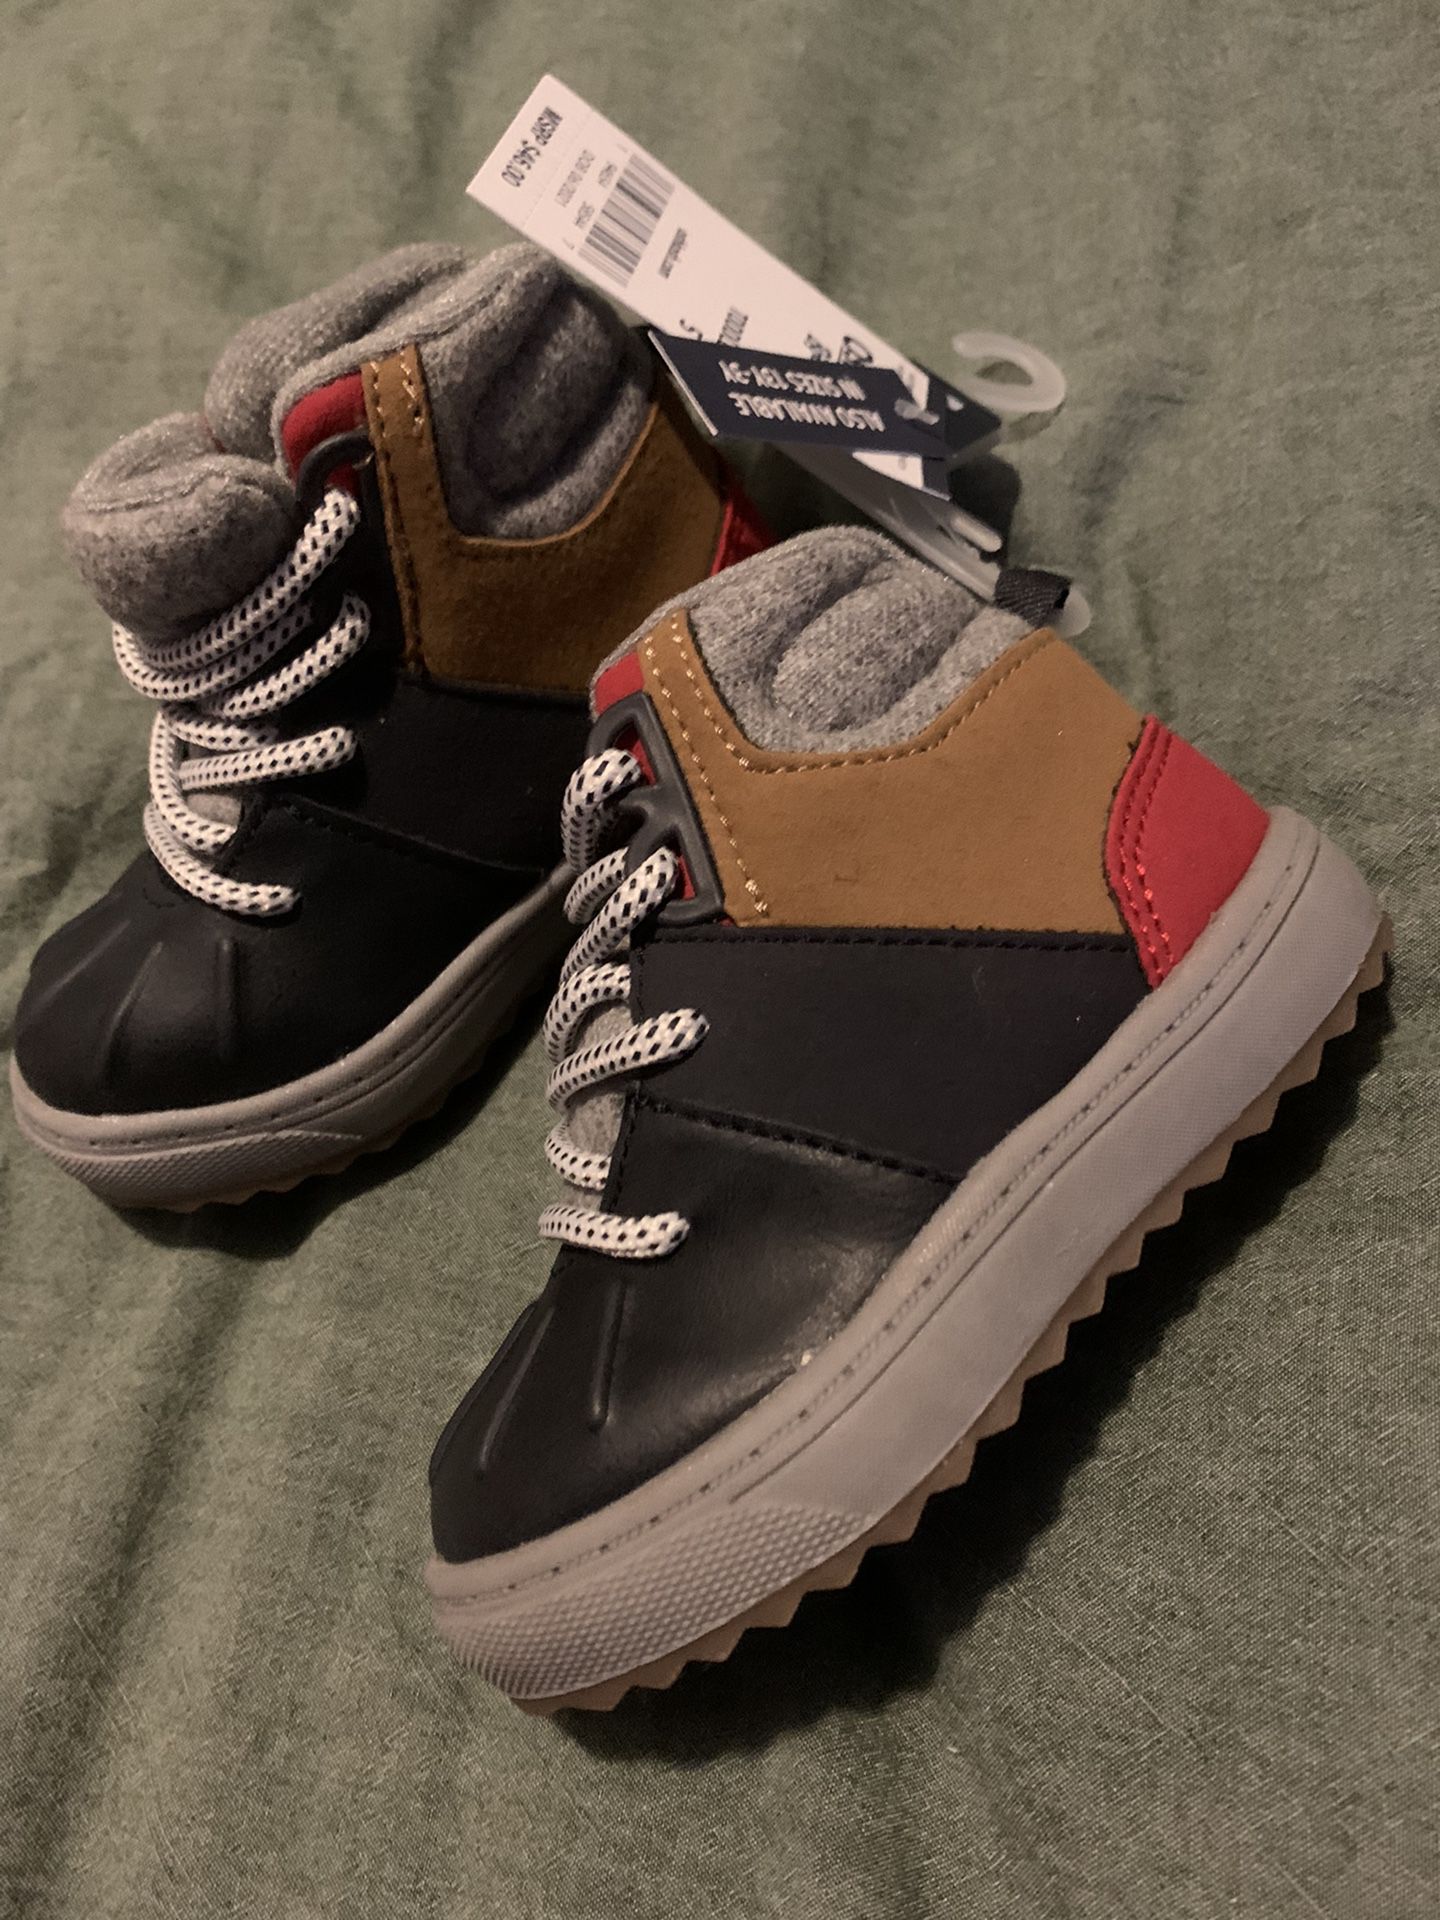 Carters Toddler Size 6 Winter Colorblock Boot